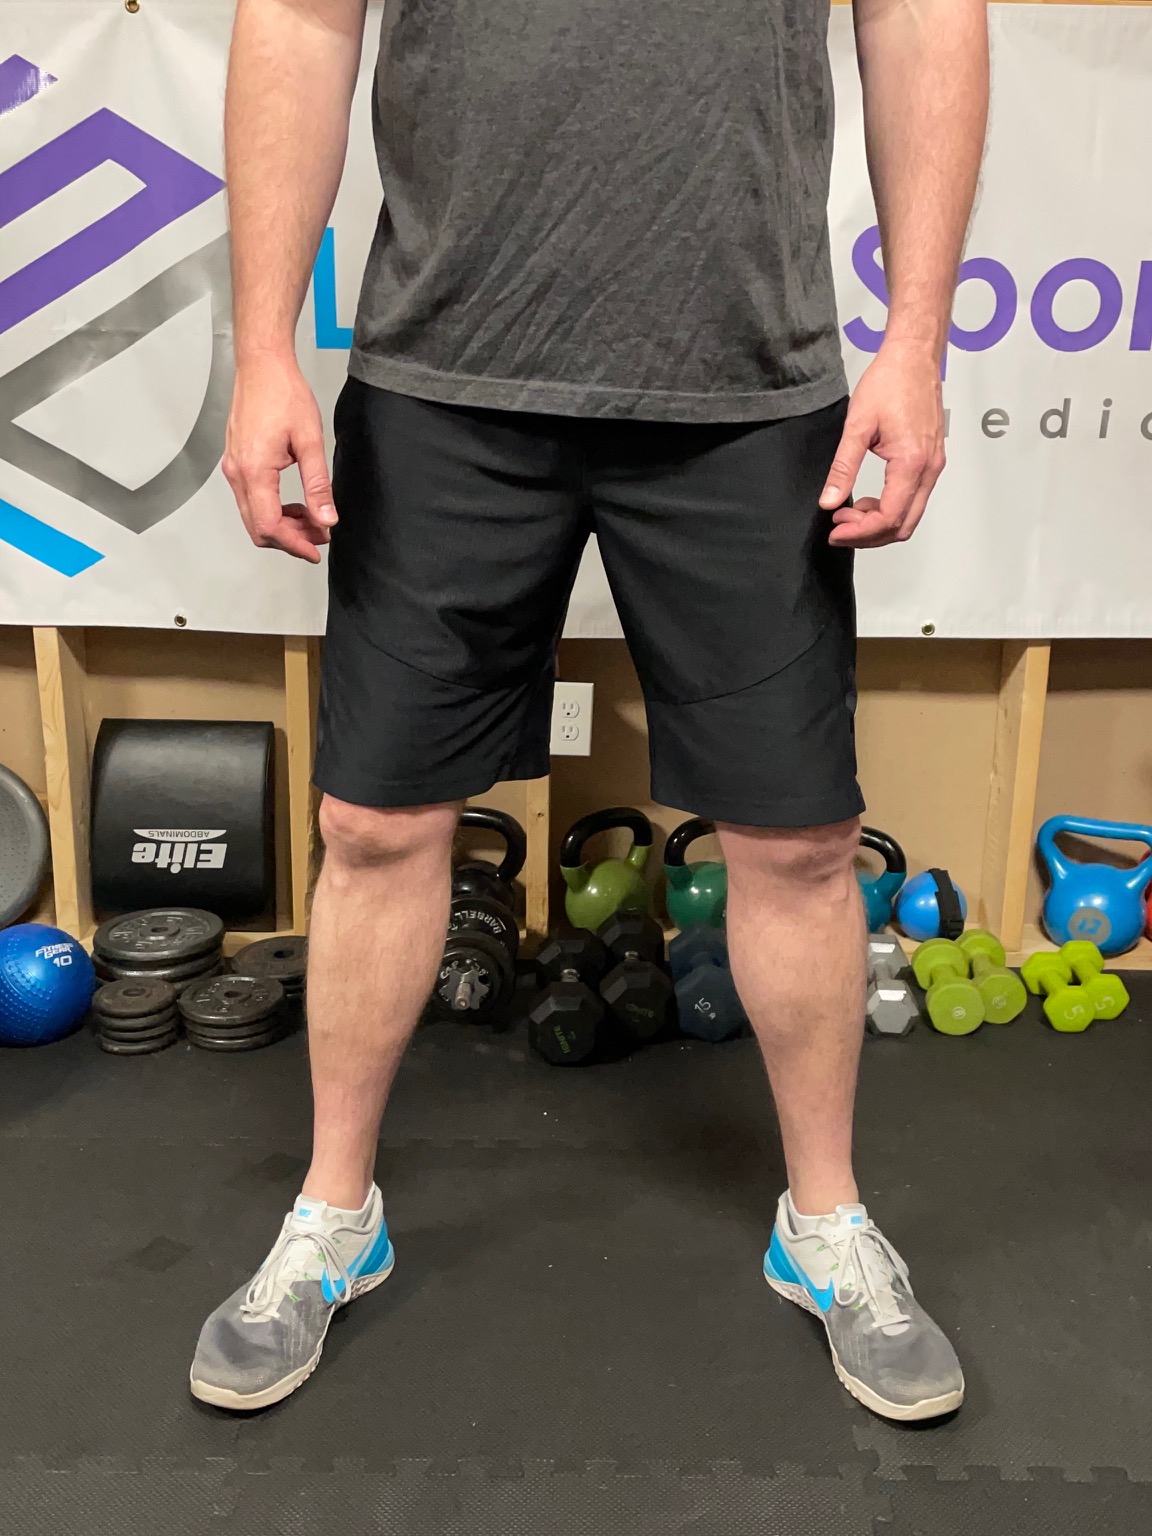 Foot Position and Squats: Stop worrying about angle and focus on placement